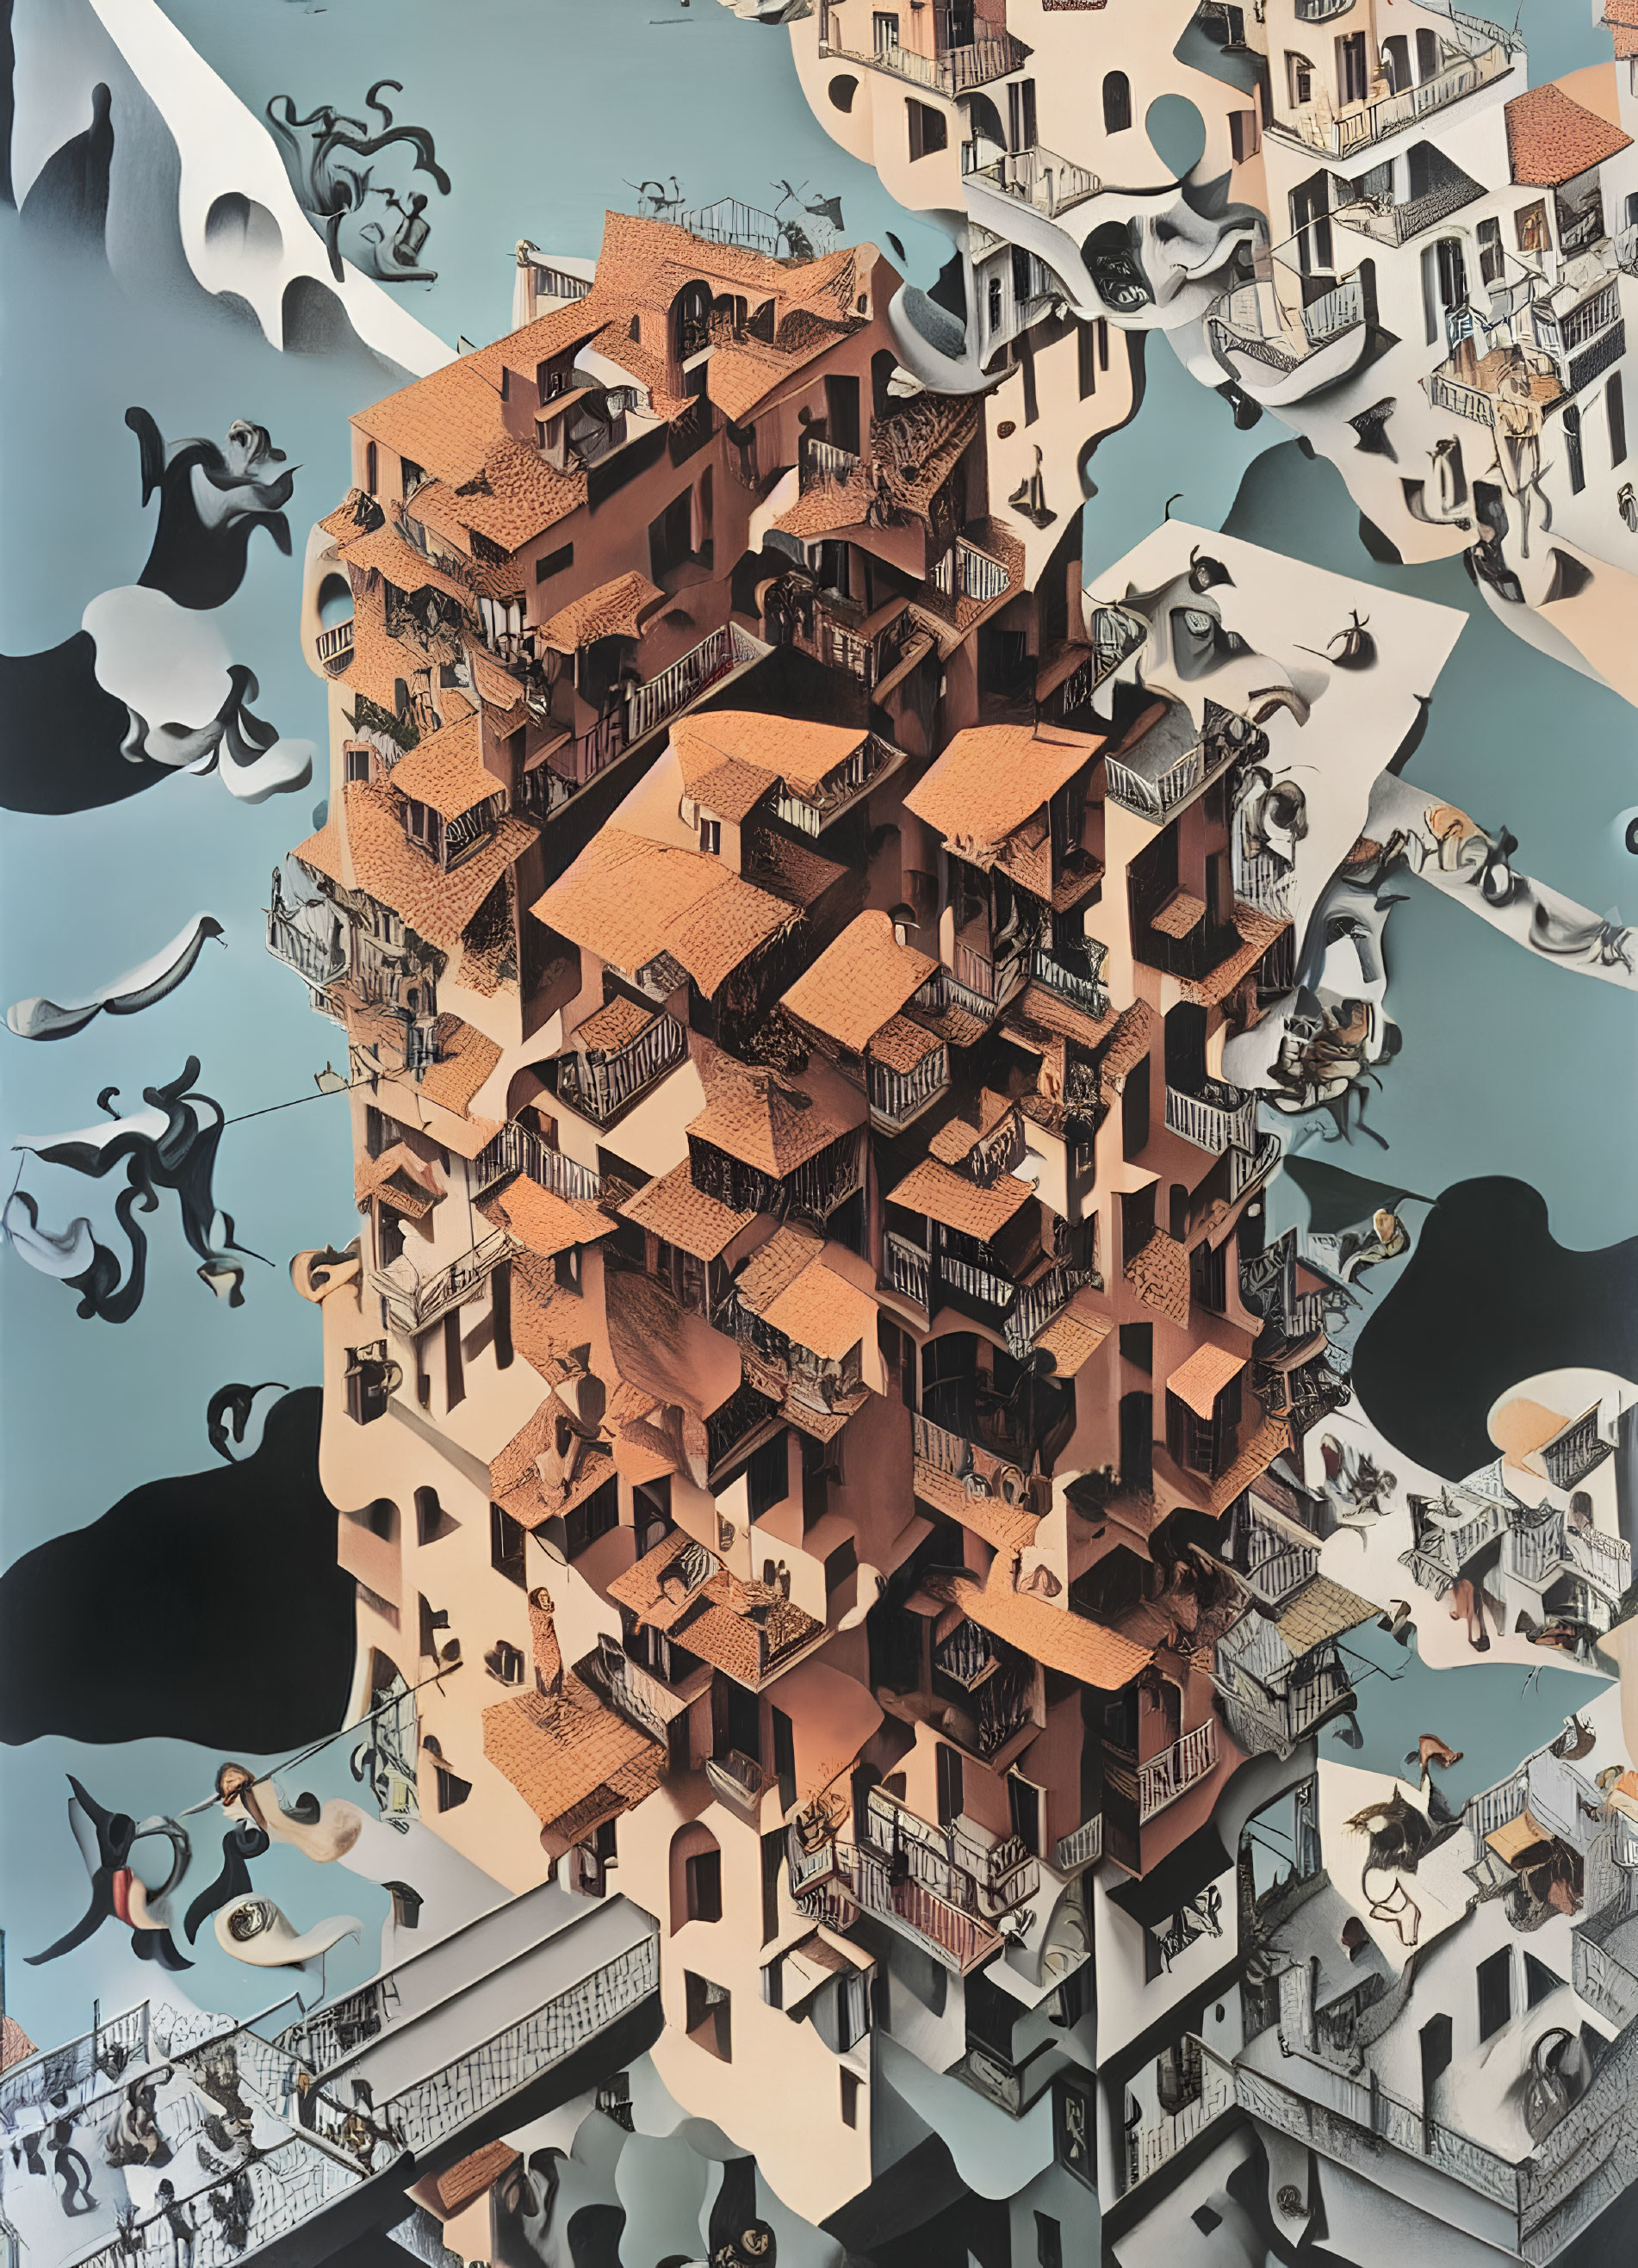 Surreal illustration of gravity-defying buildings with flying fish and birds